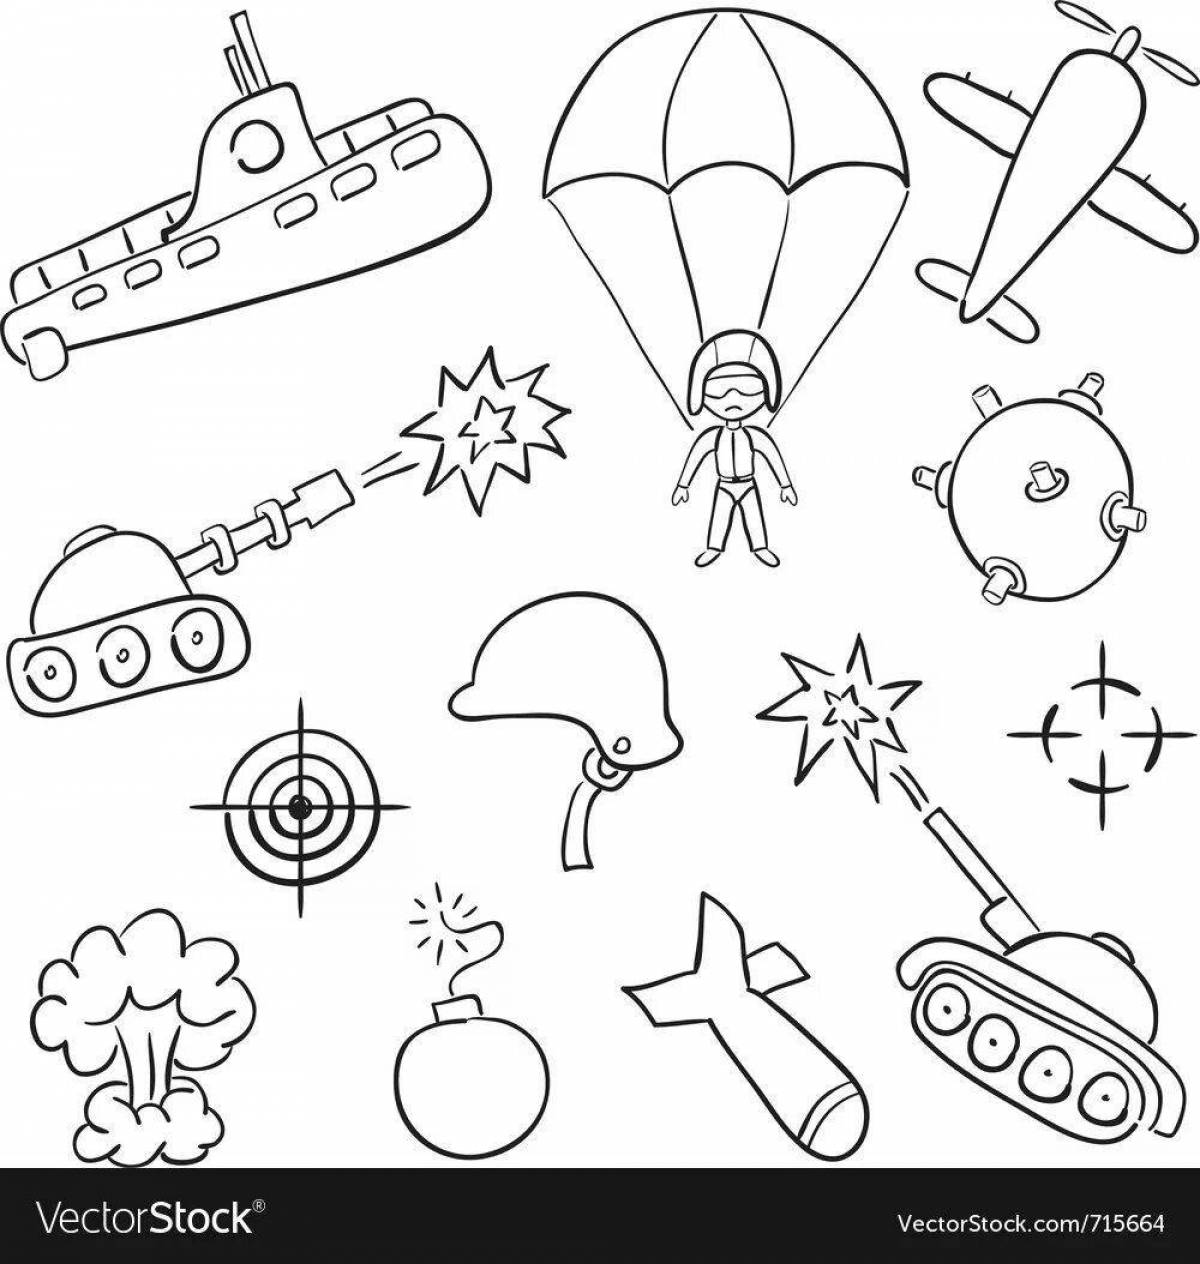 Coloring book sports skydiver